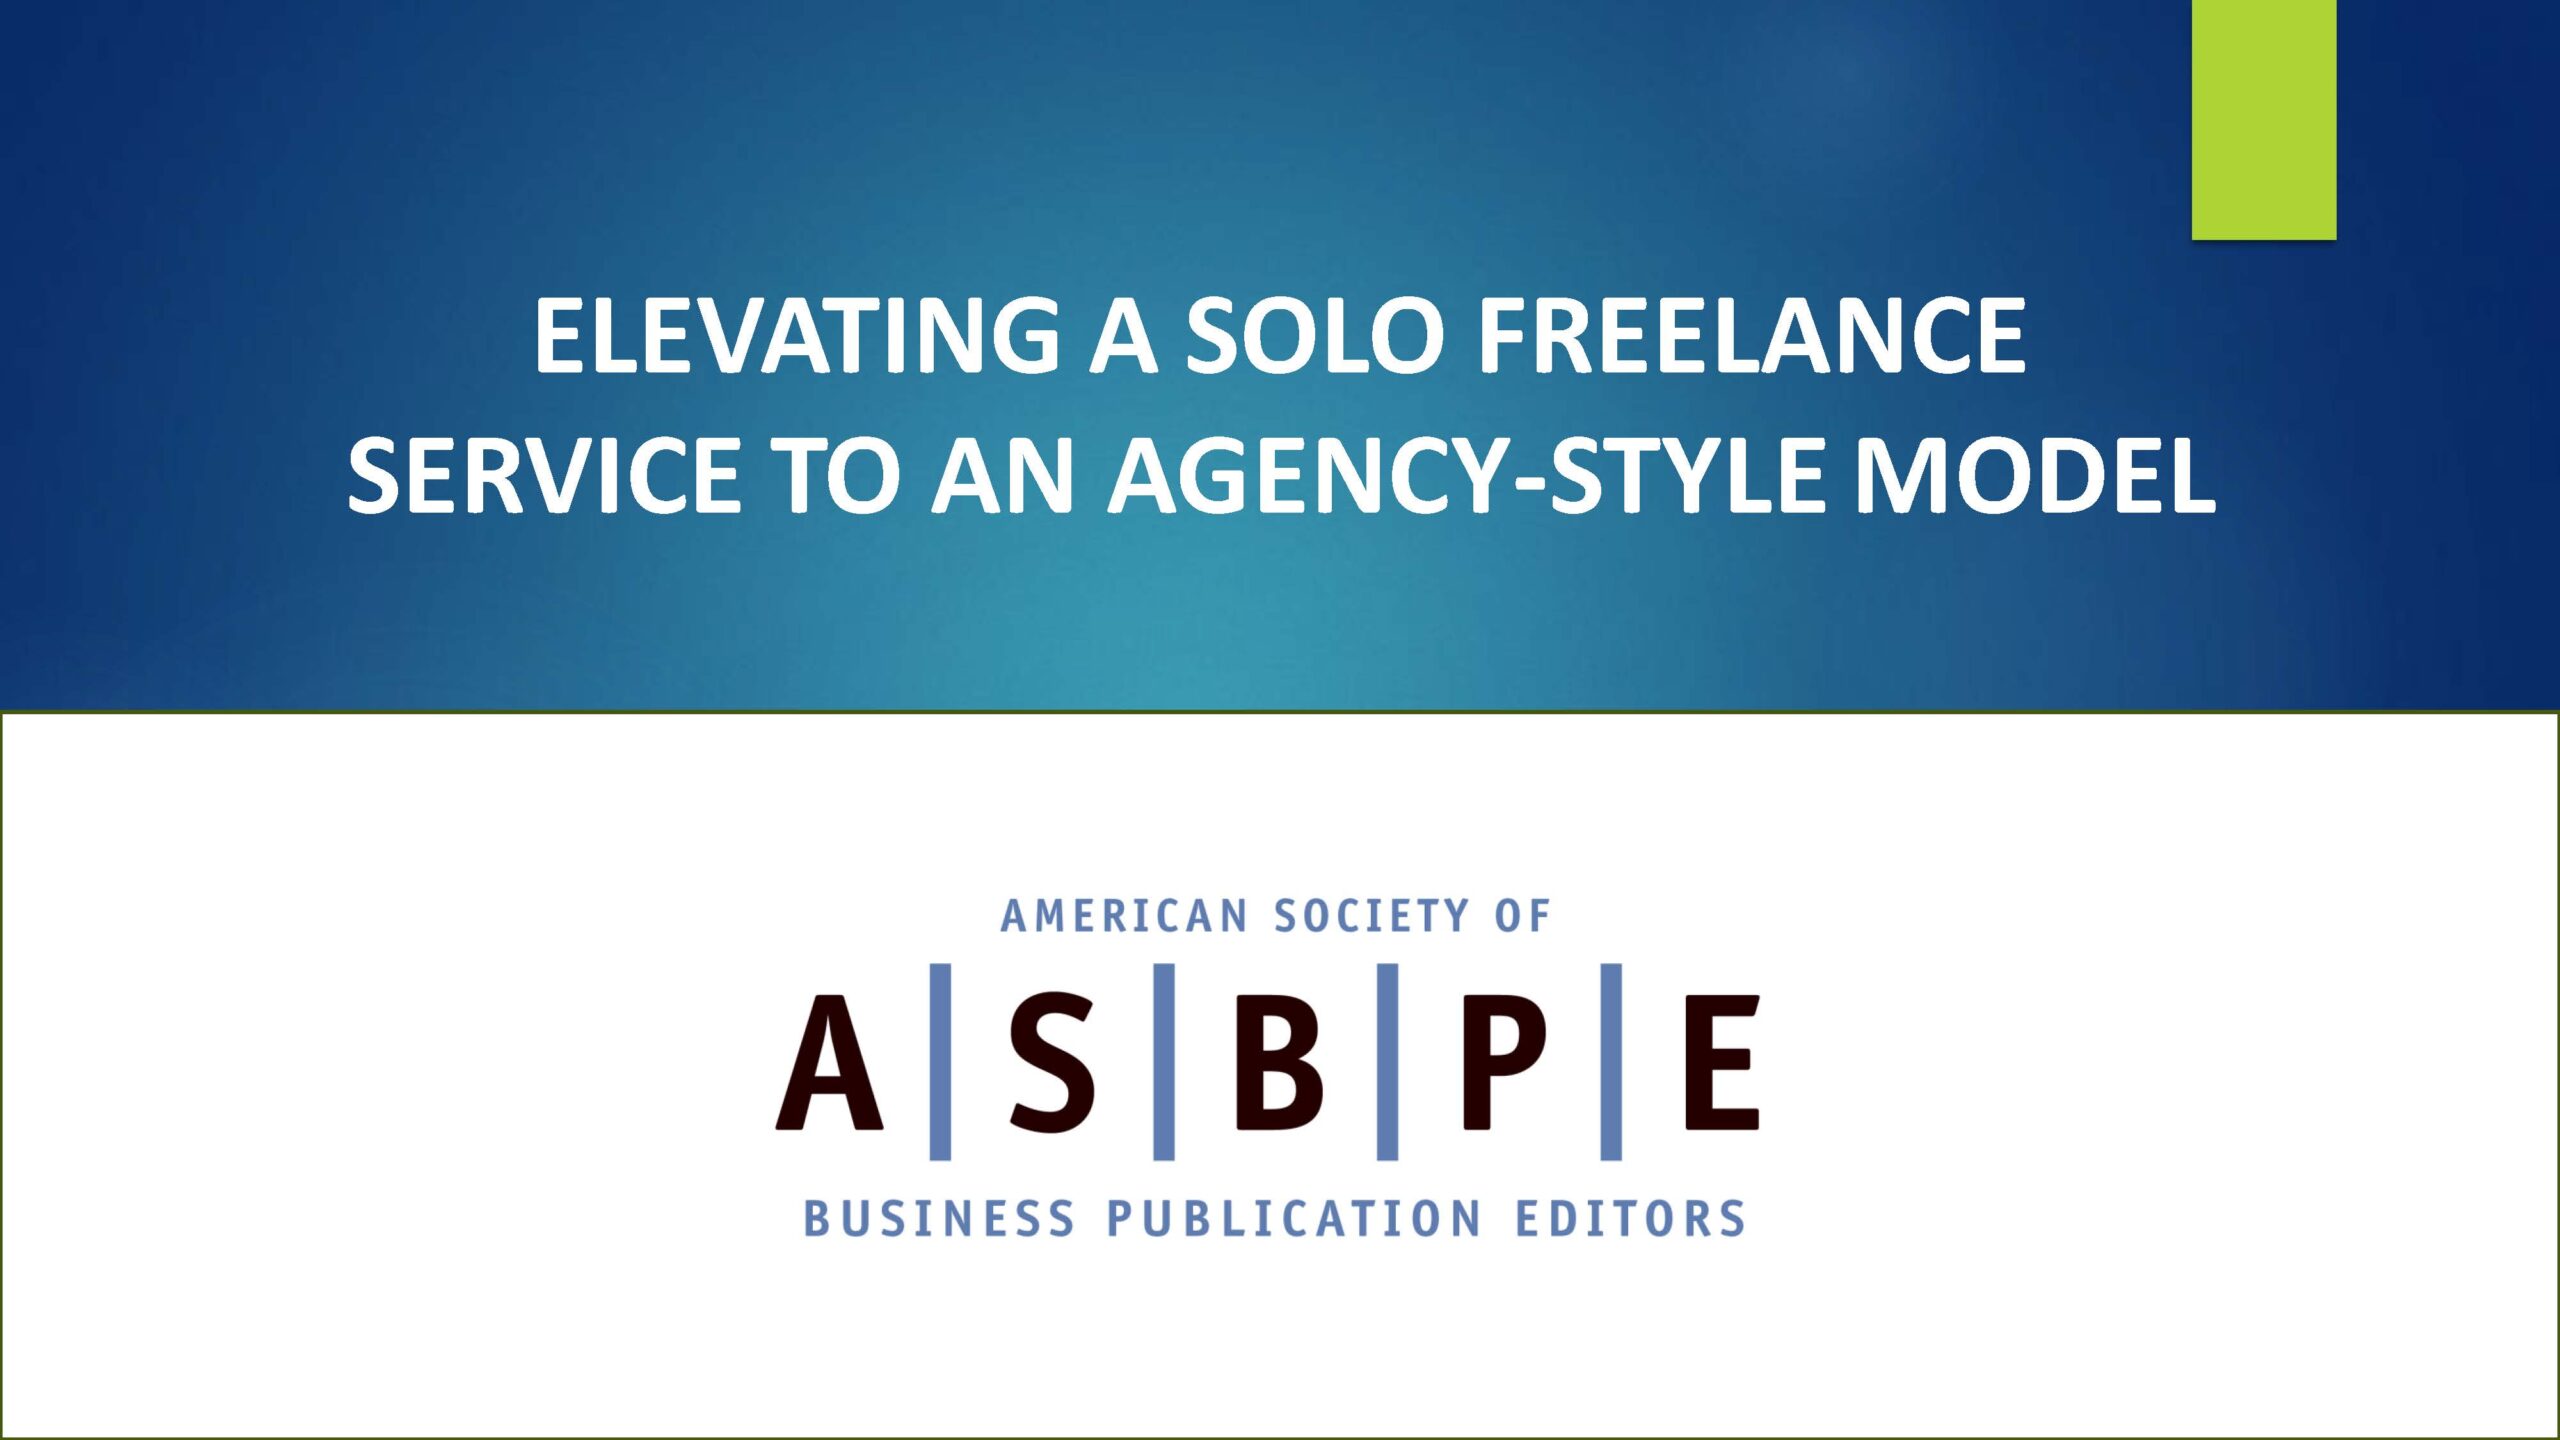 Elevating a Solo Freelance Service to an Agency-Style Model